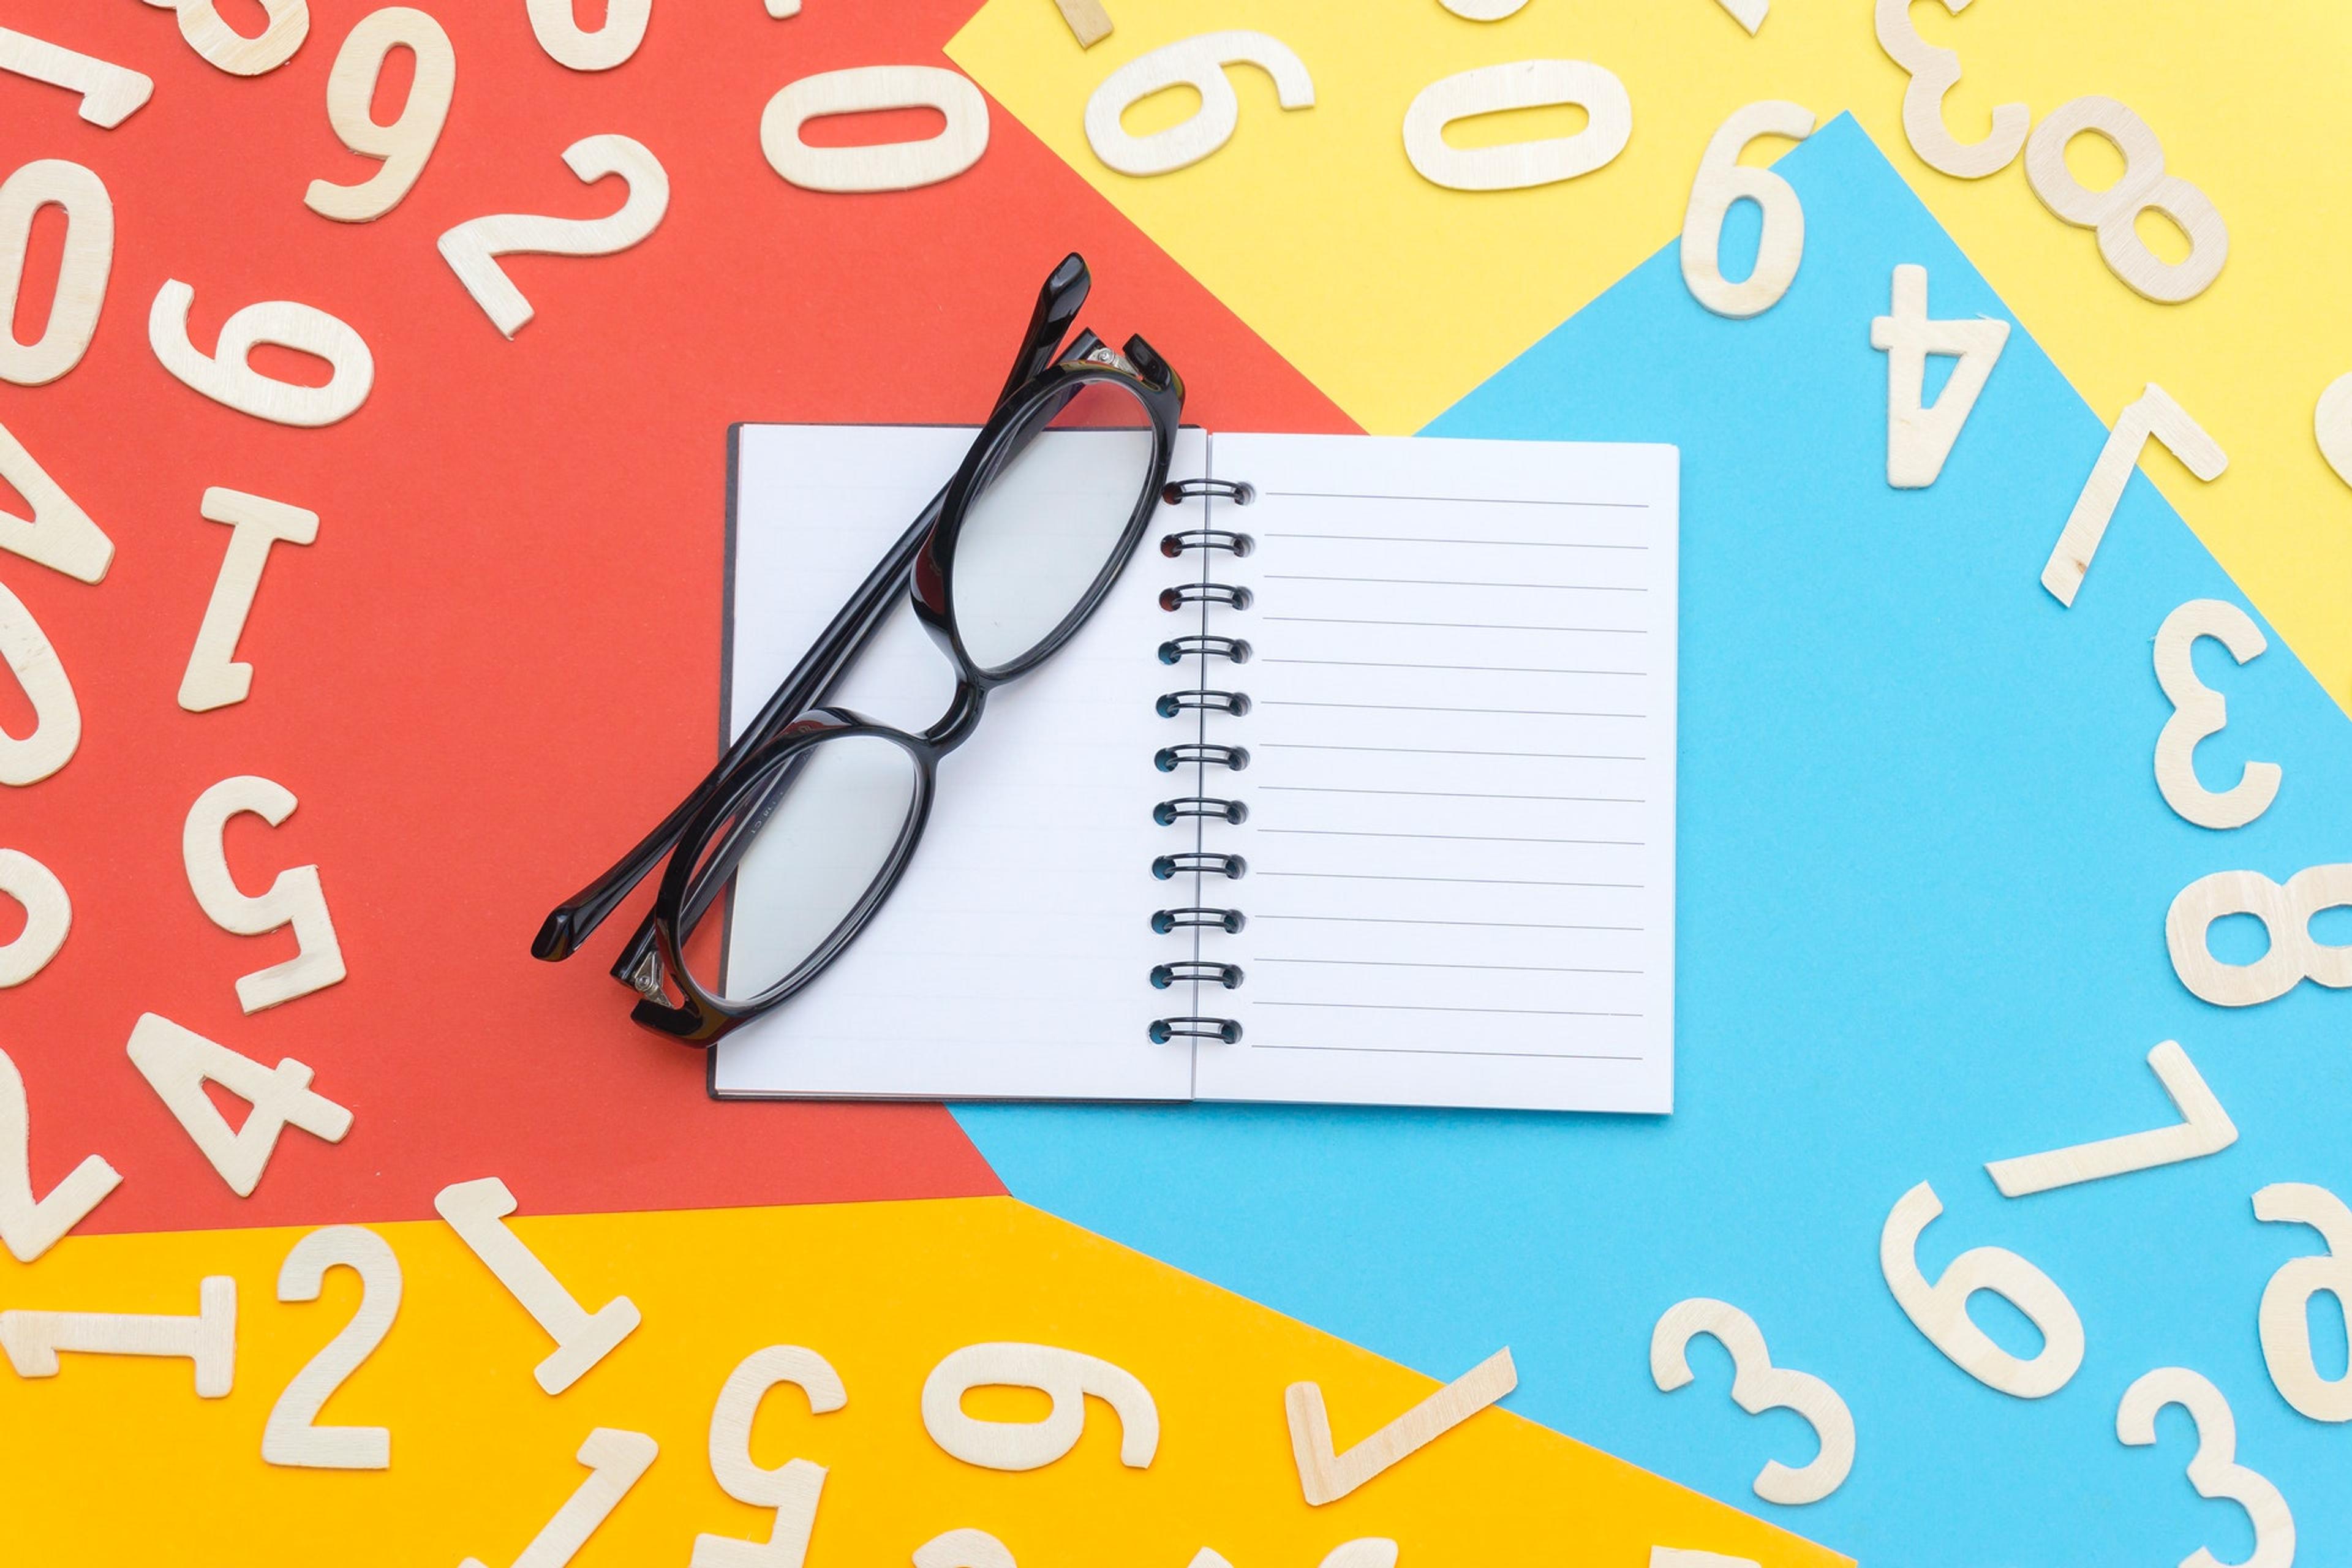 Glasses and a blank notebook on a colorful background with numbers around it